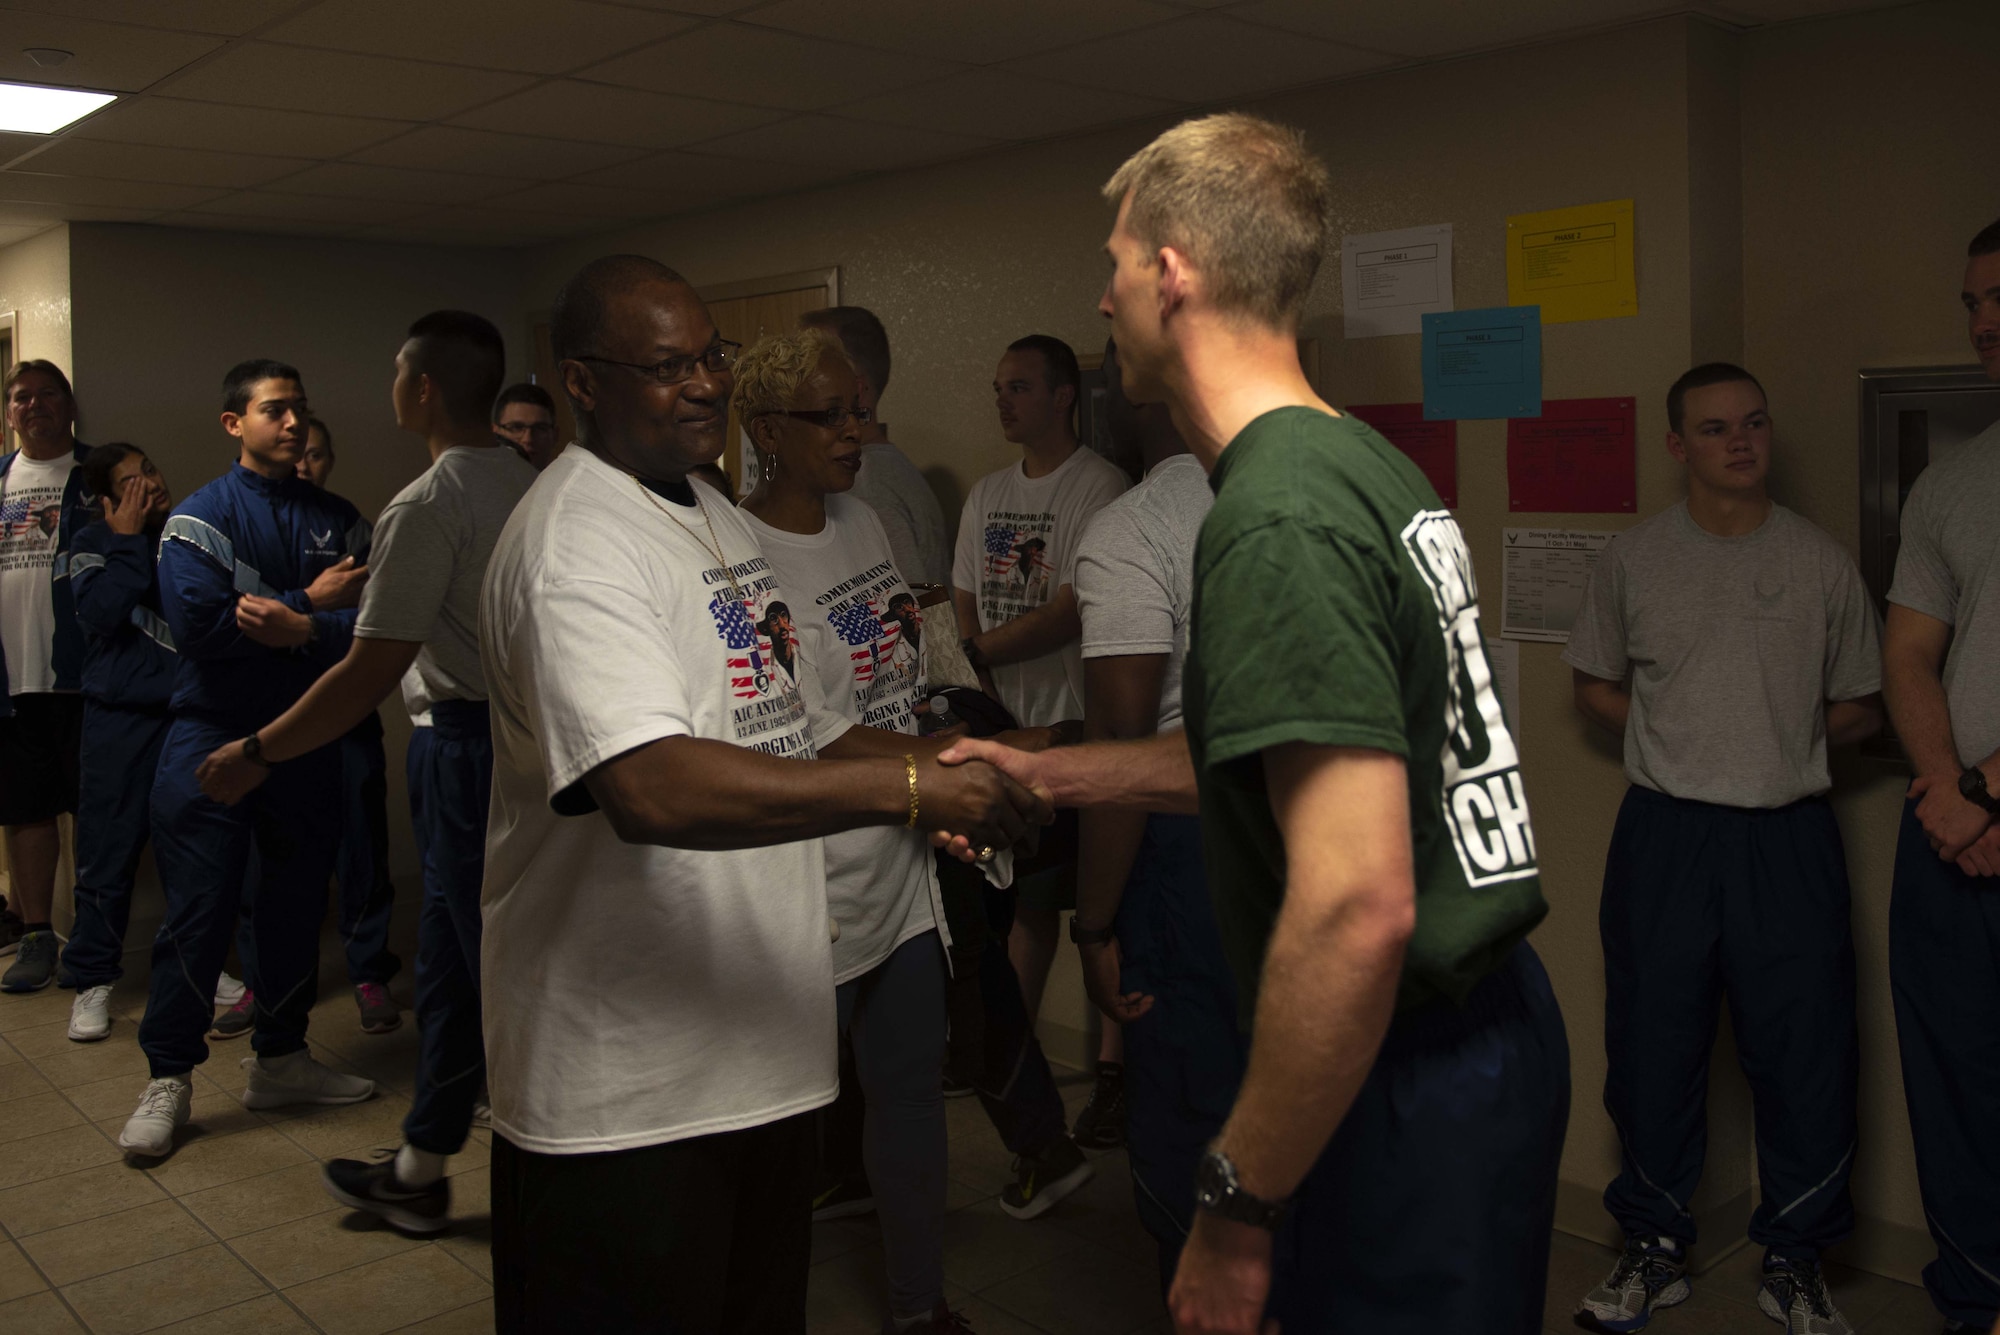 Michael Holt, U.S. Air Force Airman 1st Class Antoine Holt’s father, shakes hands with a 334th Training Squadron Airman at Keesler Air Force Base, Mississippi, April 5, 2019. During his visit, Michael told Antoine’s story, spoke with 334th TRS Airmen about resiliency and played basketball. (U.S. Air Force photo by Airman 1st Class Kimberly Mueller)